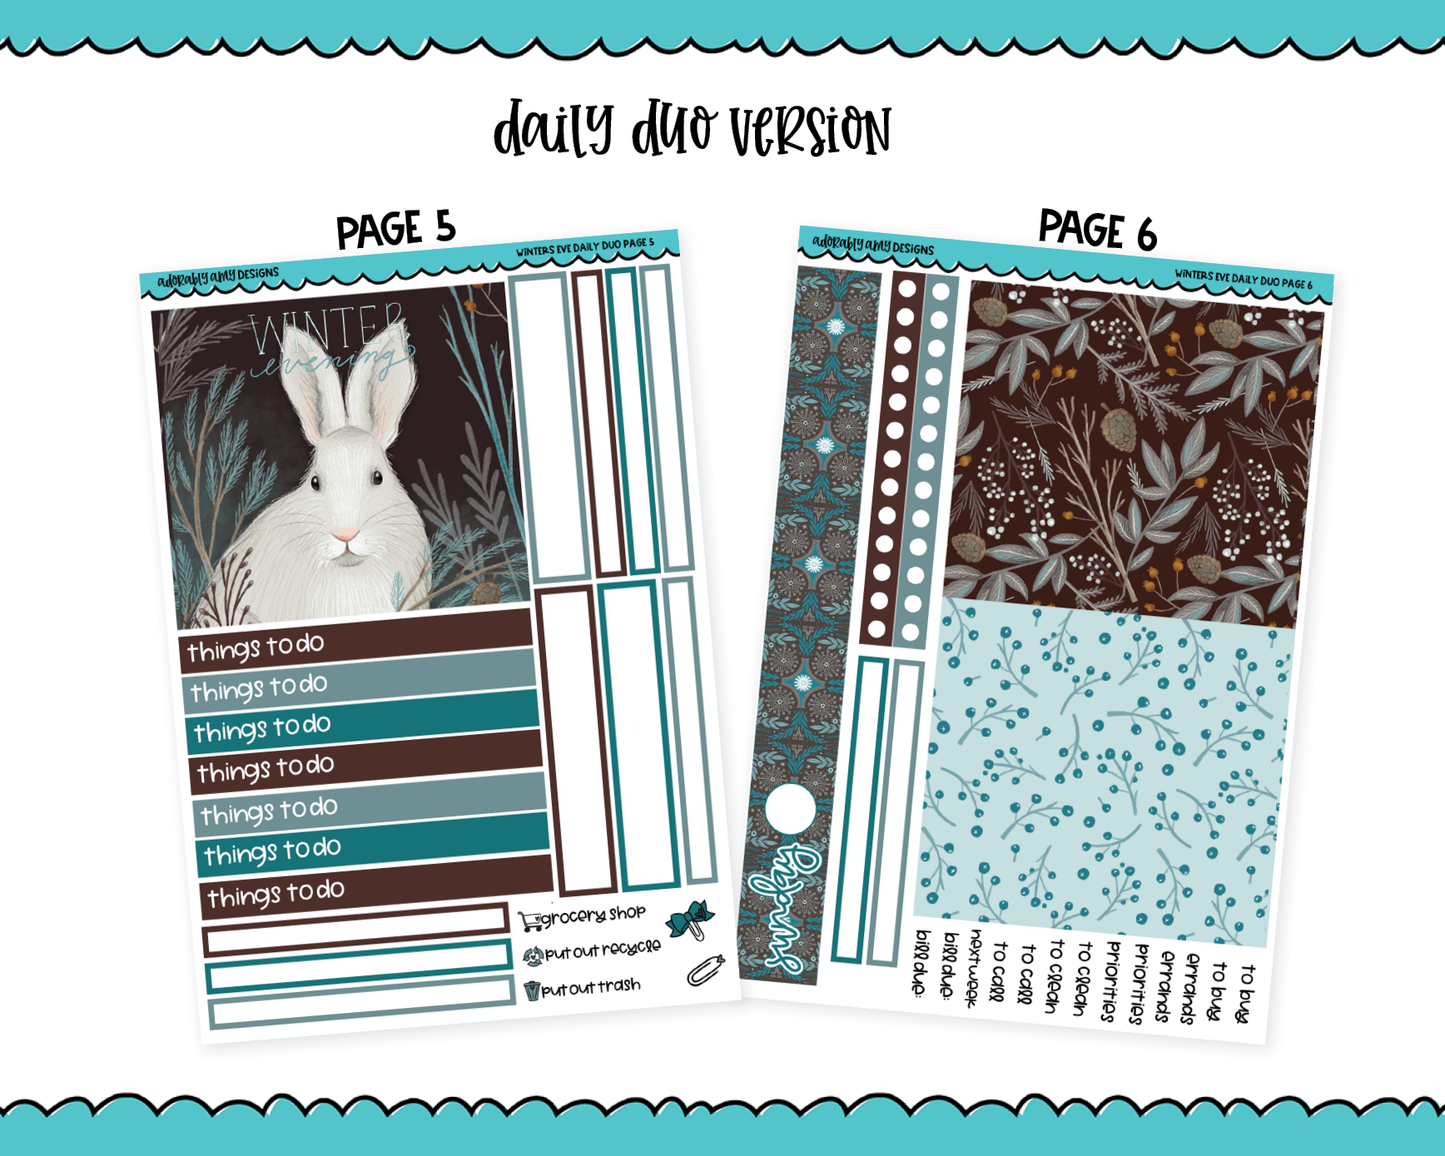 Daily Duo Winter's Eve Animal Winter Themed Weekly Planner Sticker Kit for Daily Duo Planner